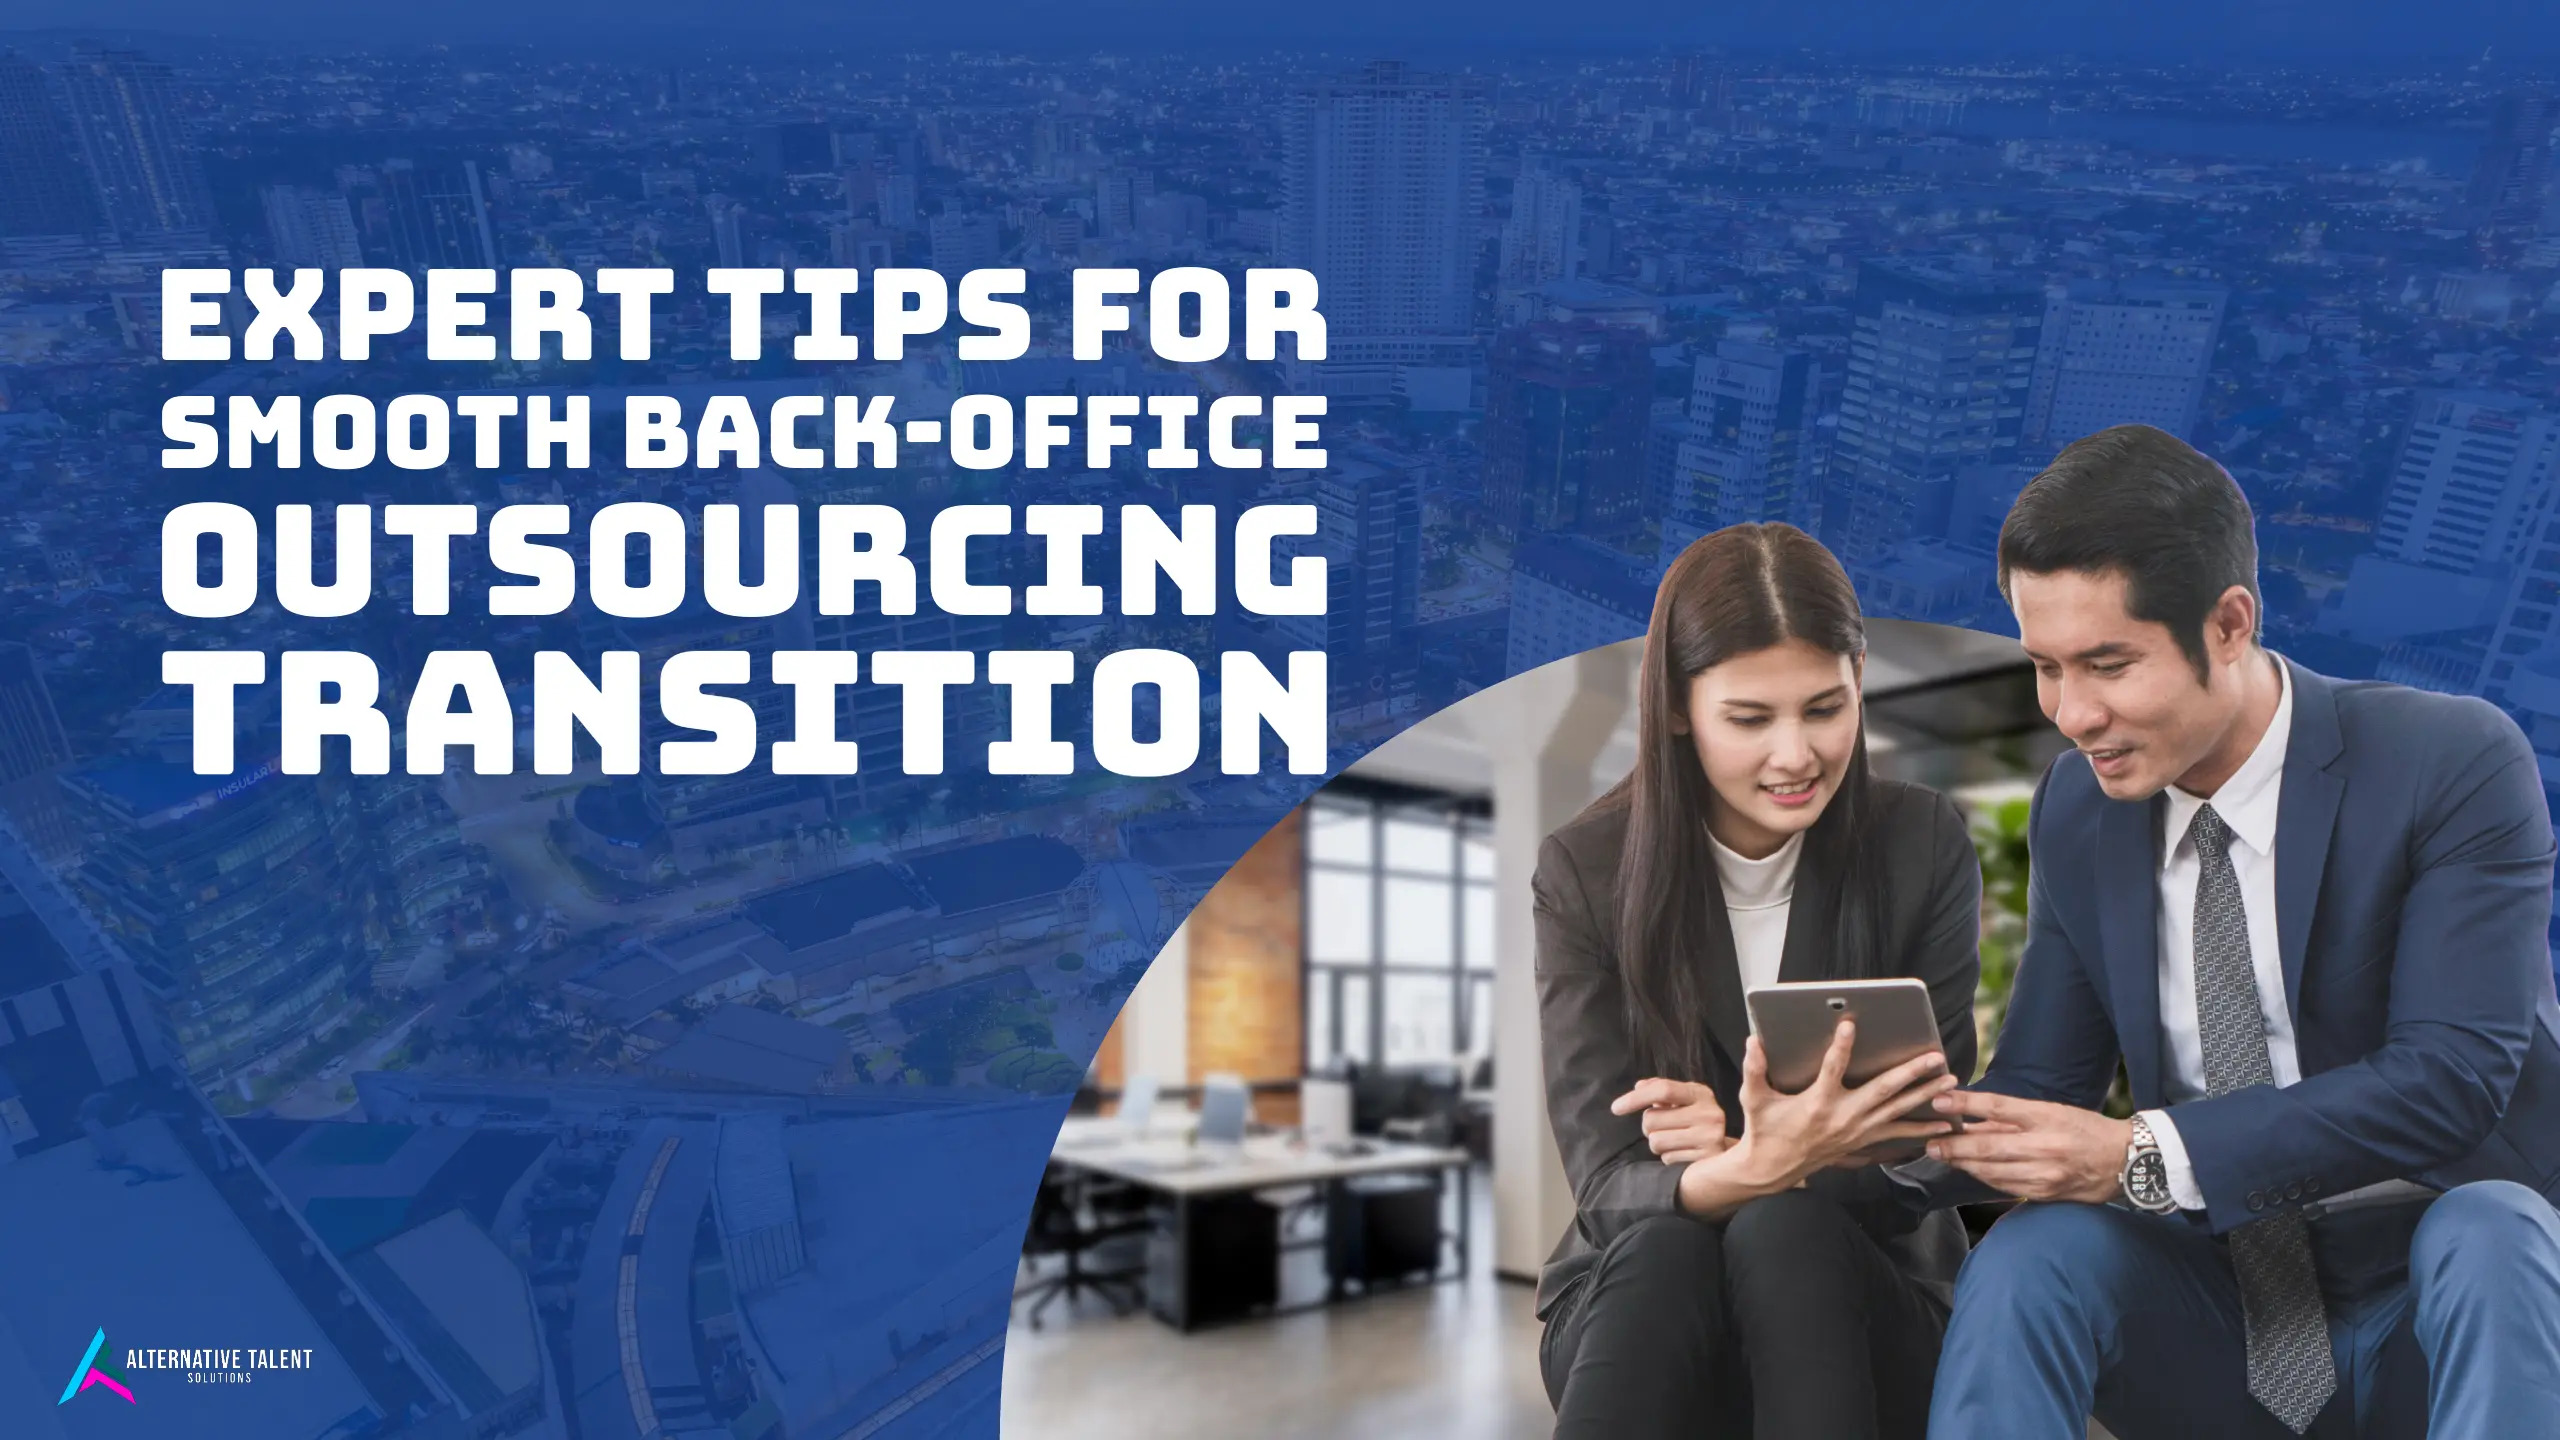 Expert Tips for Smooth Back-Office Outsourcing Transition